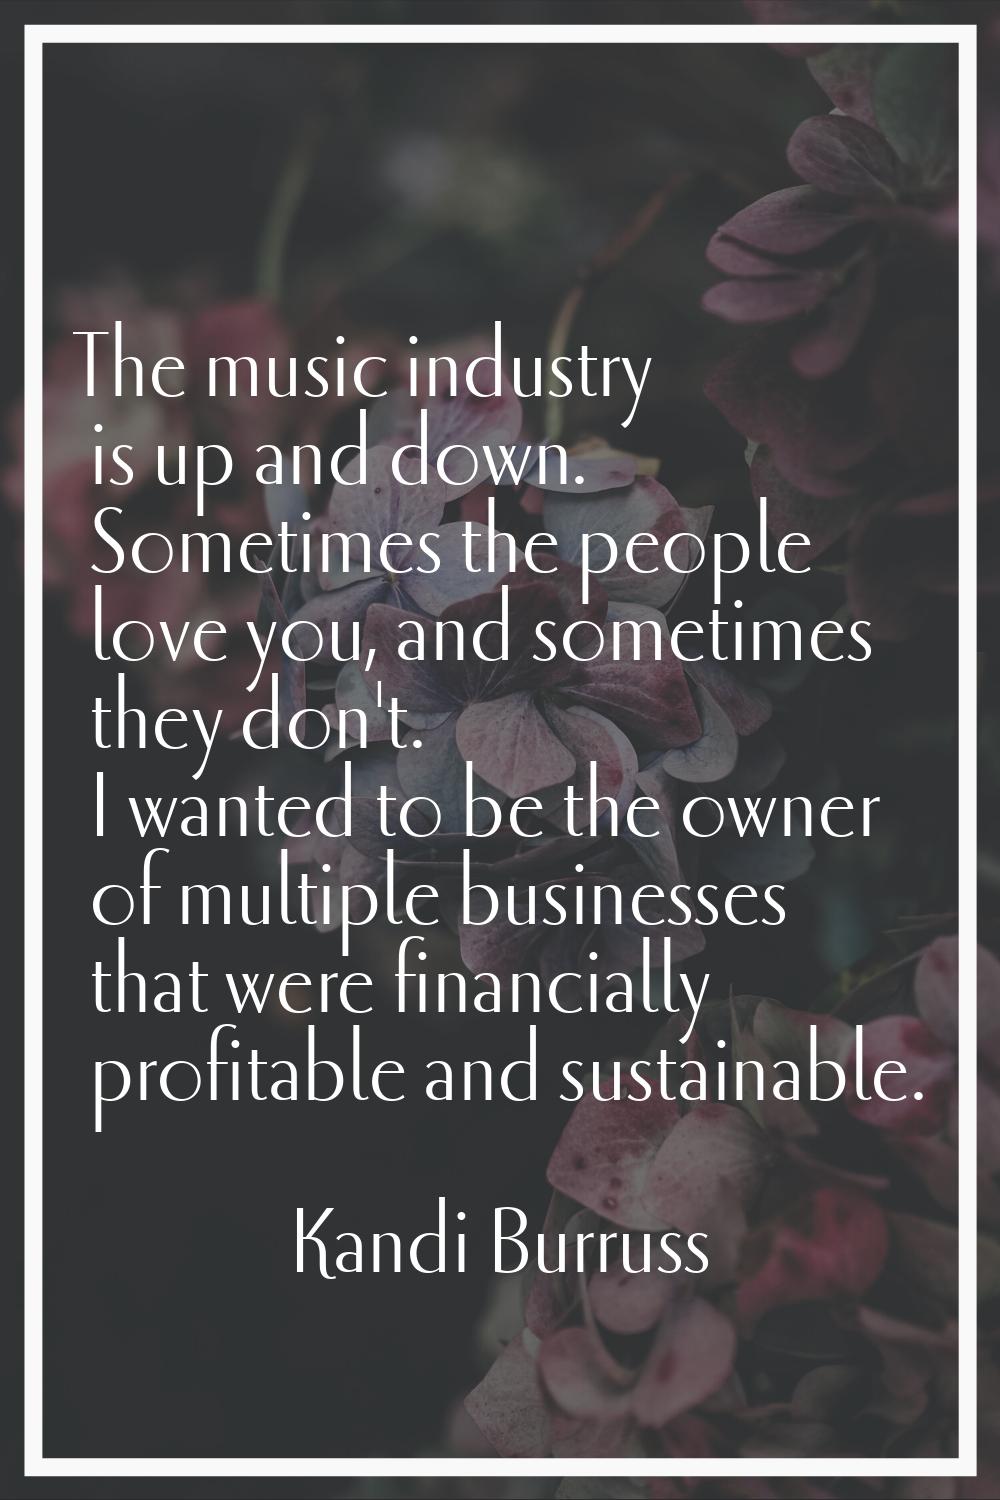 The music industry is up and down. Sometimes the people love you, and sometimes they don't. I wante